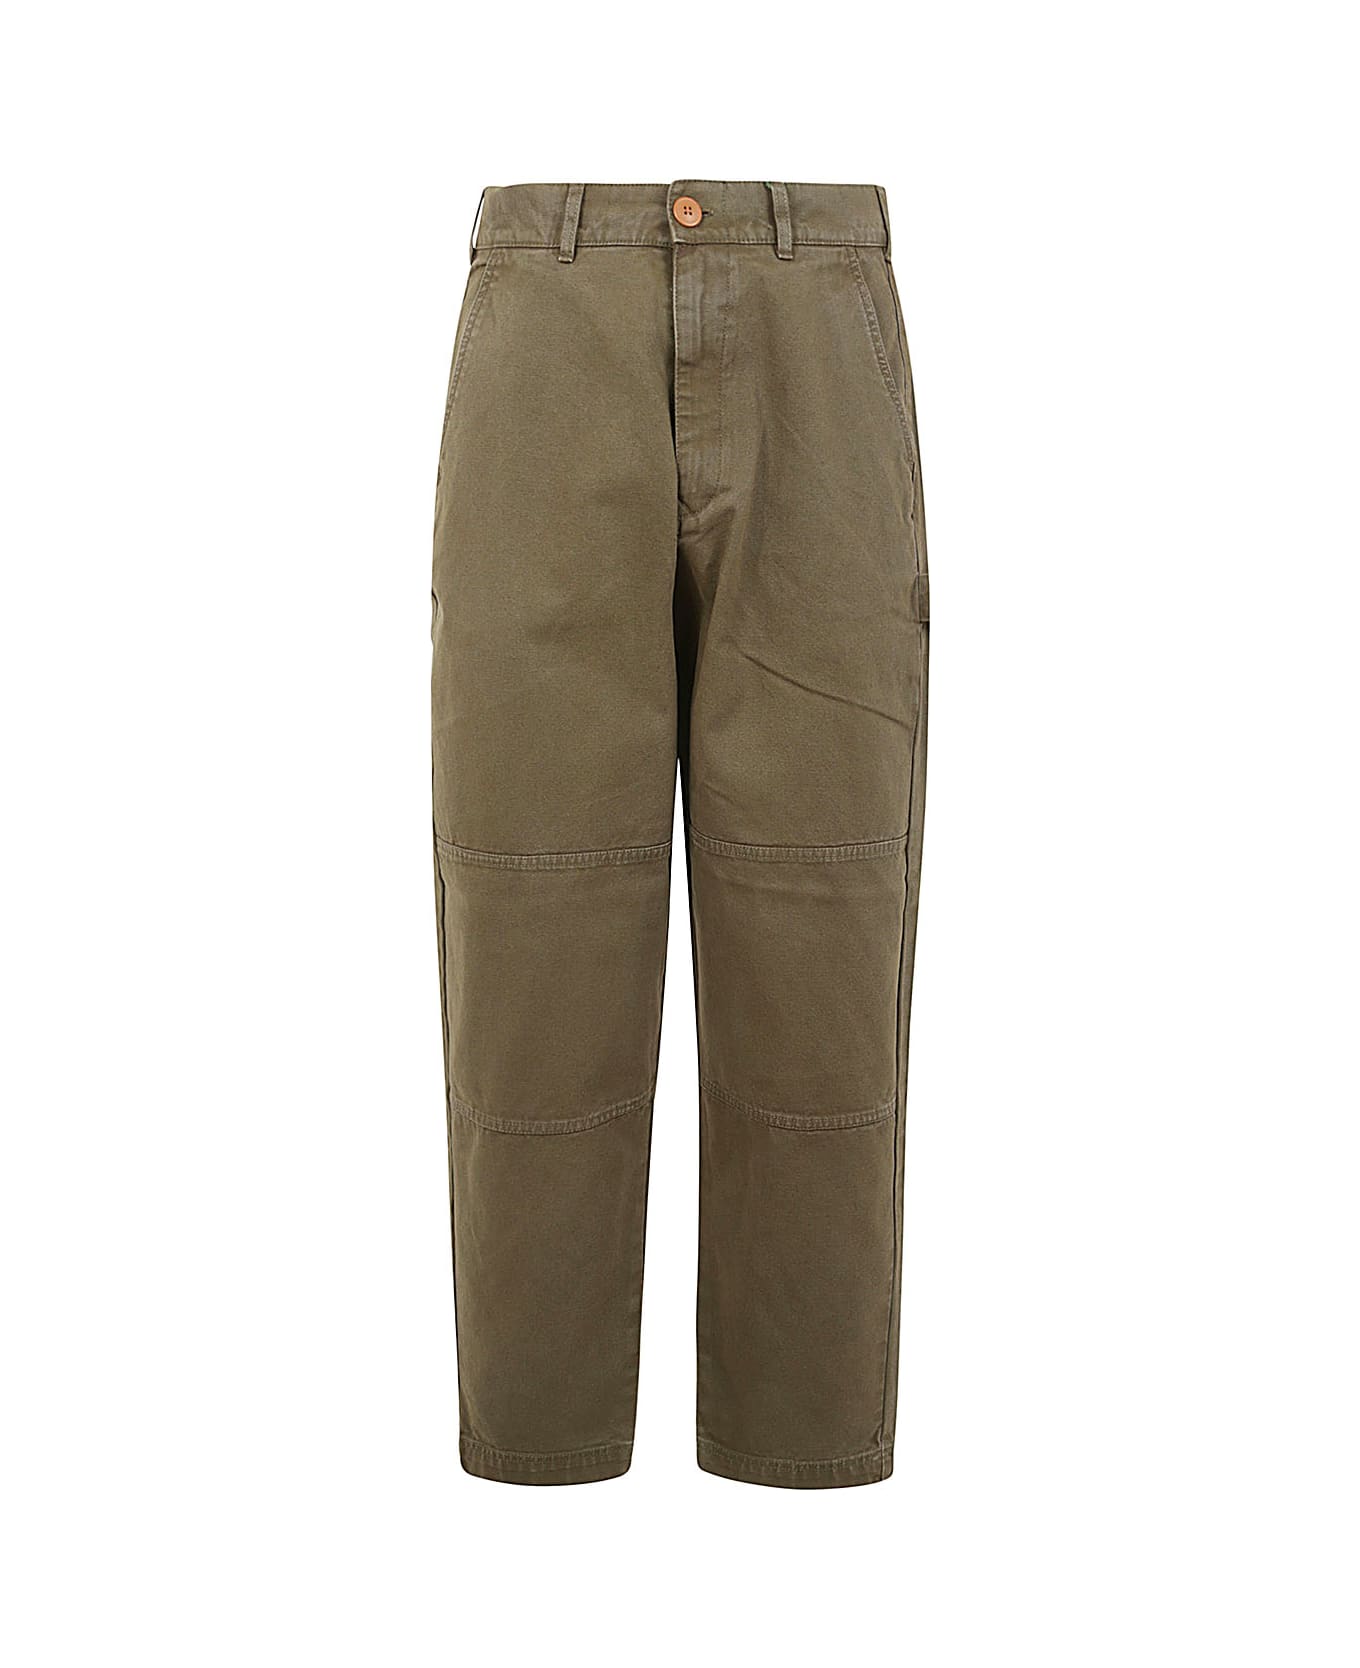 Barbour Chesterwood Work Trousers - Pale Sage